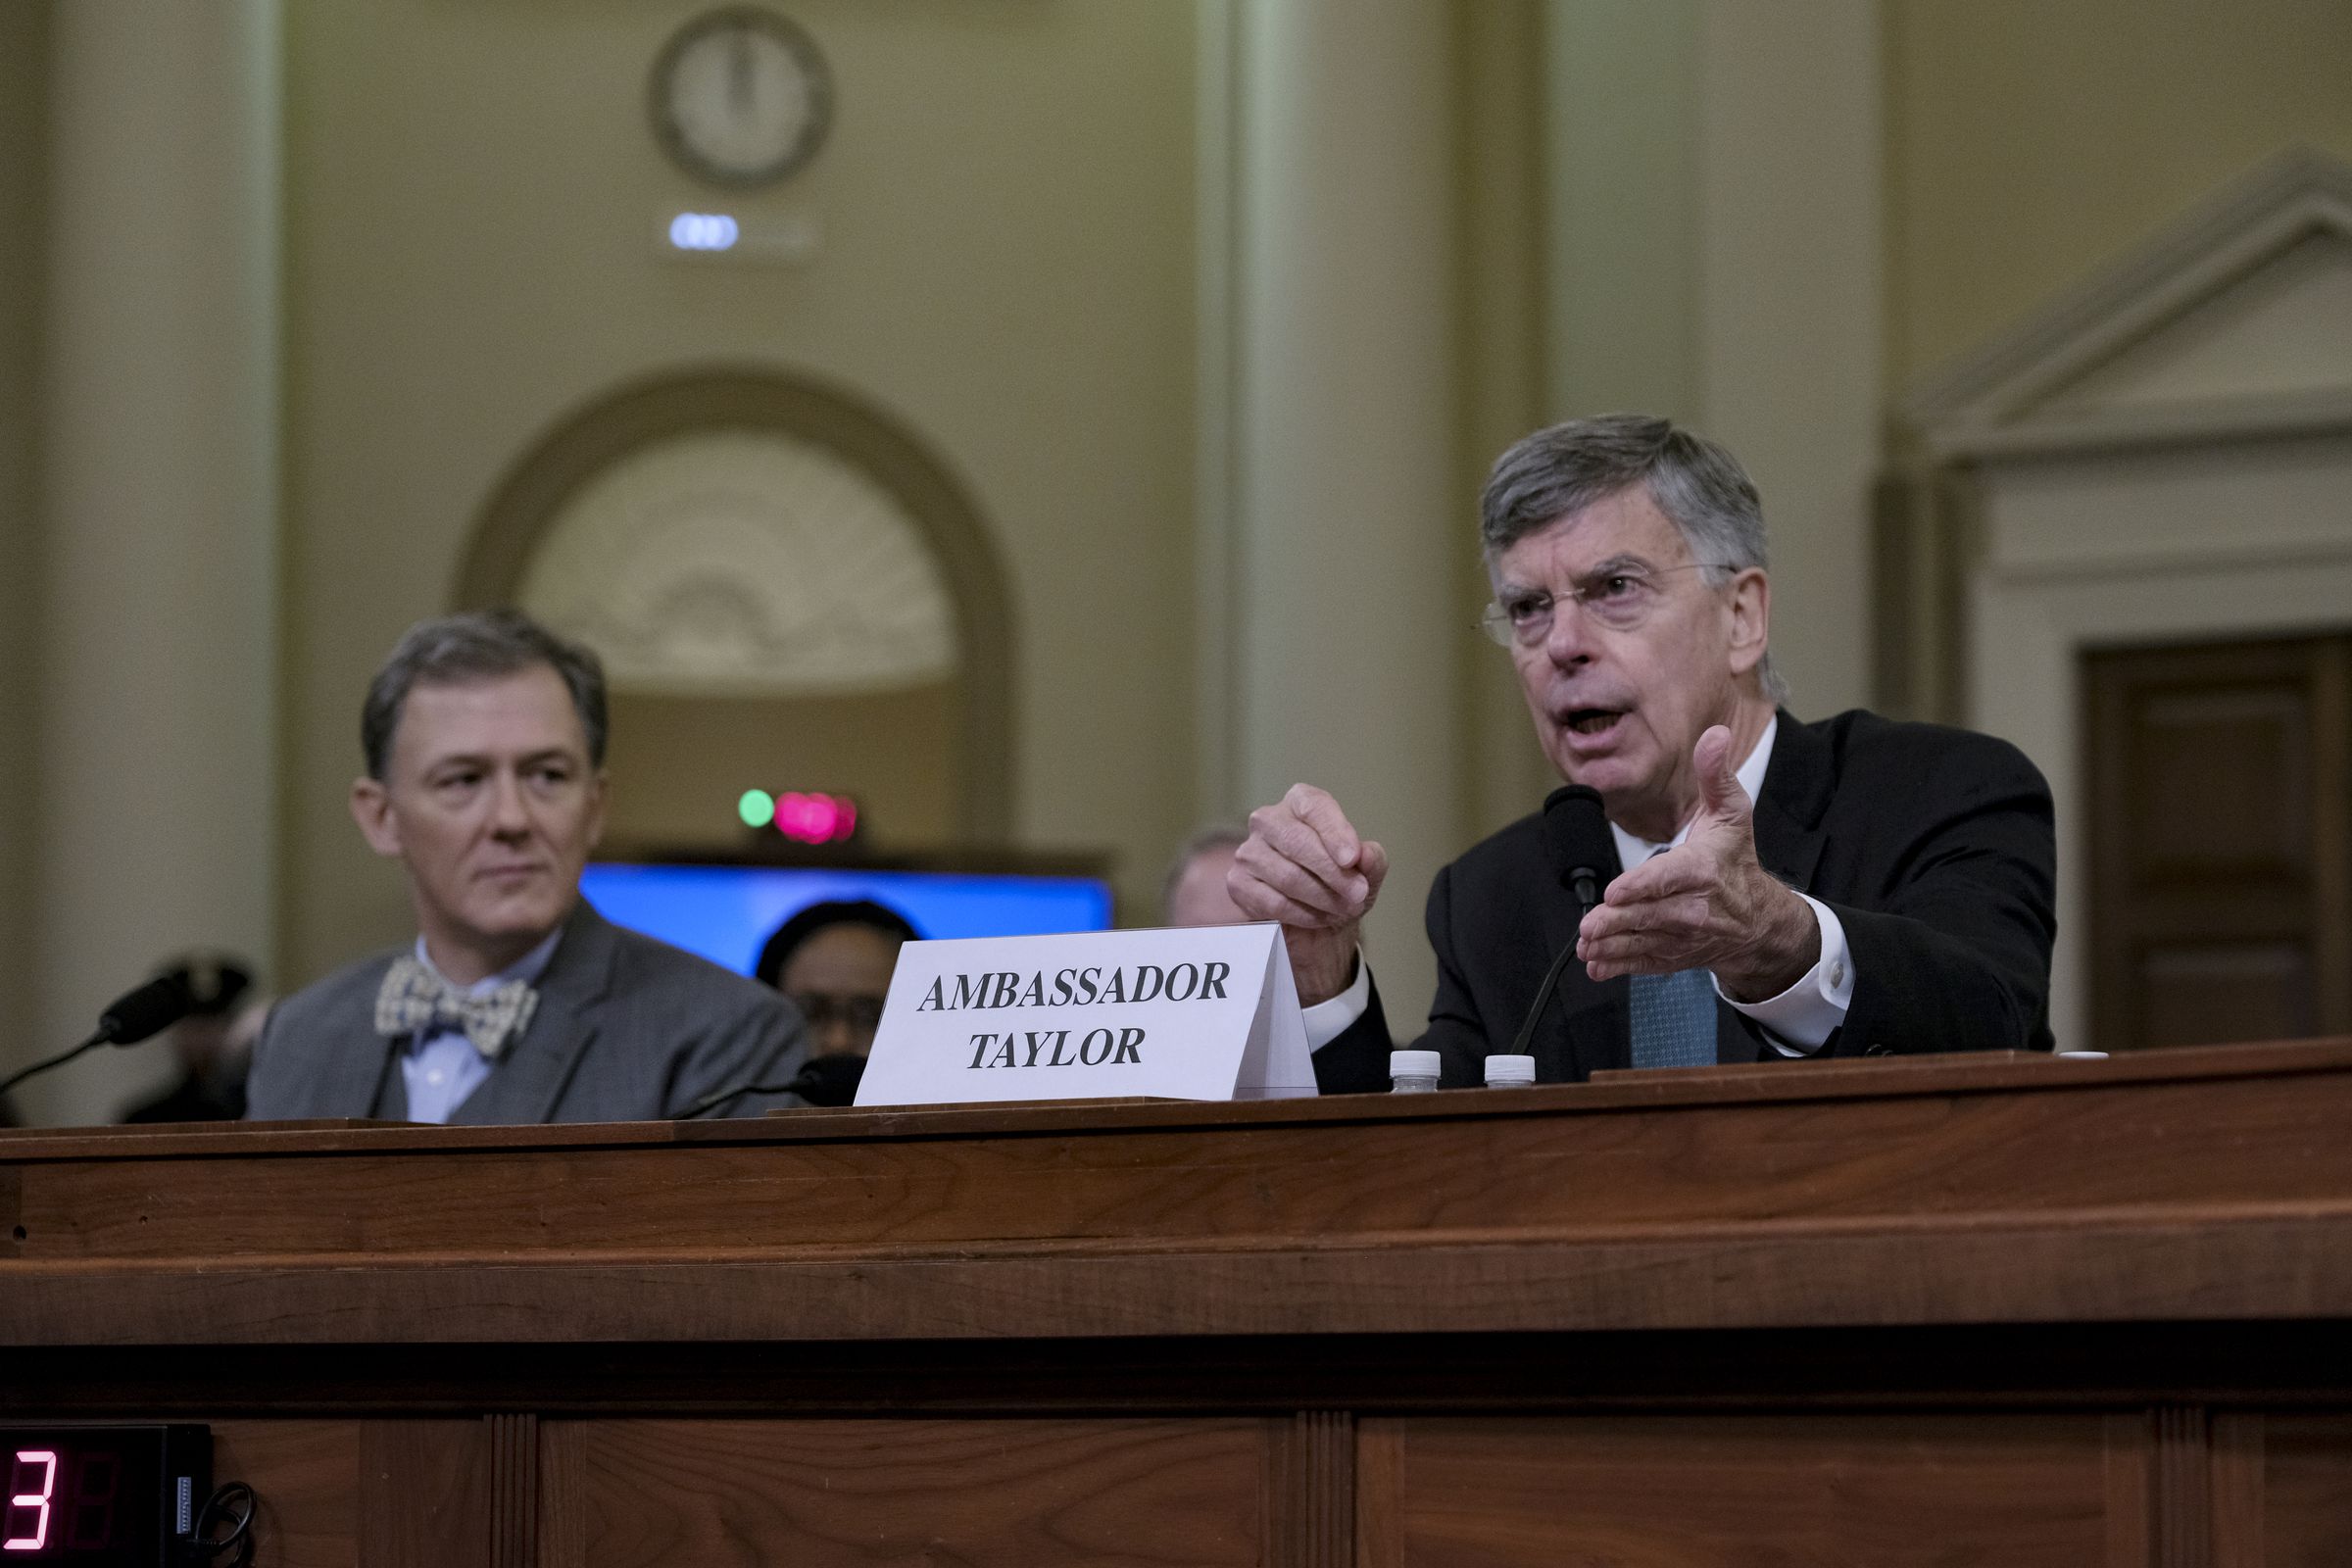 Ambassador William Taylor, right, speaks, along with Deputy Assistant Secretary George Kent appear during an impeachment inquiry in Washington, D.C. on November 13